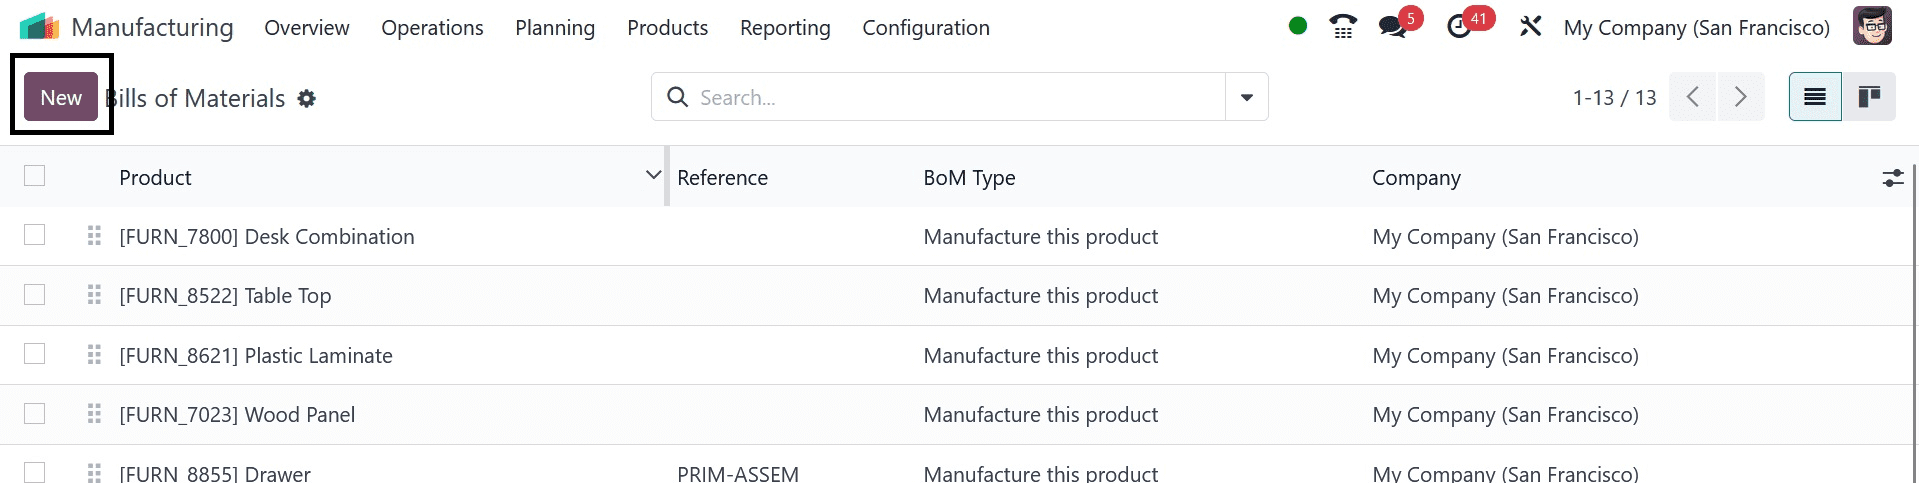 How to Manage Bills of Materials (BOM) in Odoo 17 Manufacturing App-cybrosys